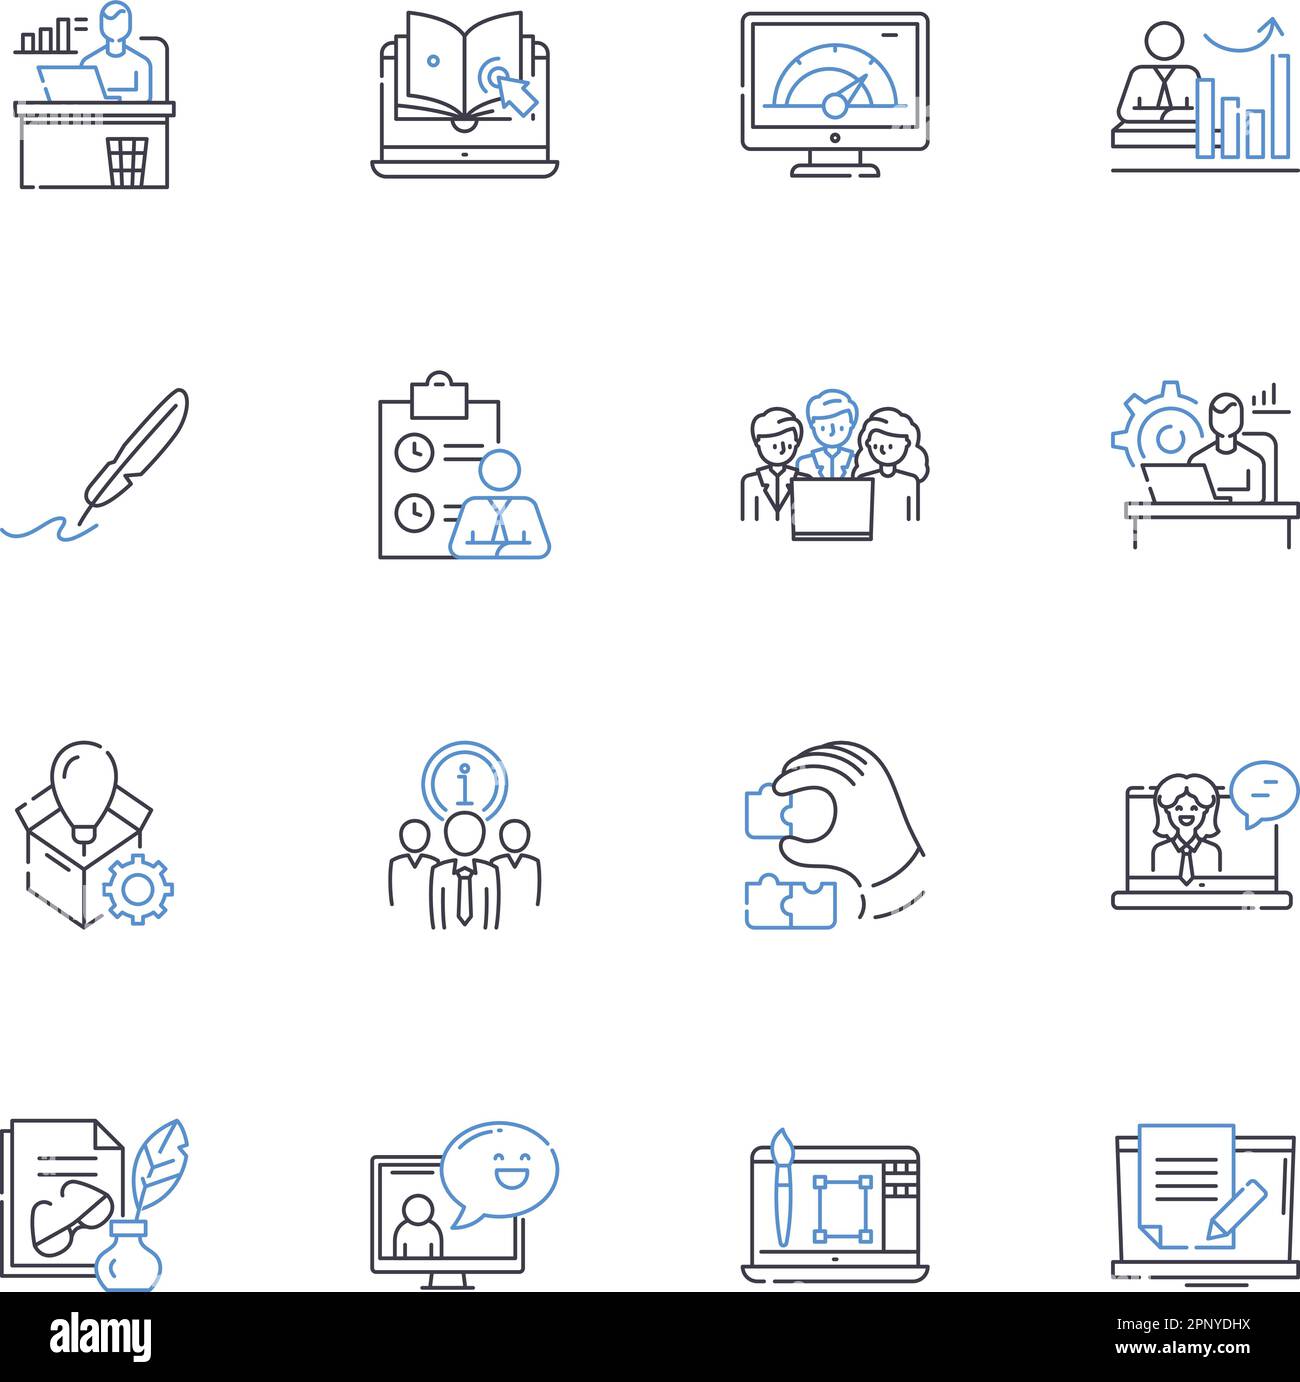 Adaptability and flexibility line icons collection. Versatility, Compatibility, Resourcefulness, Elasticity, Open-mindedness, Innovativeness Stock Vector